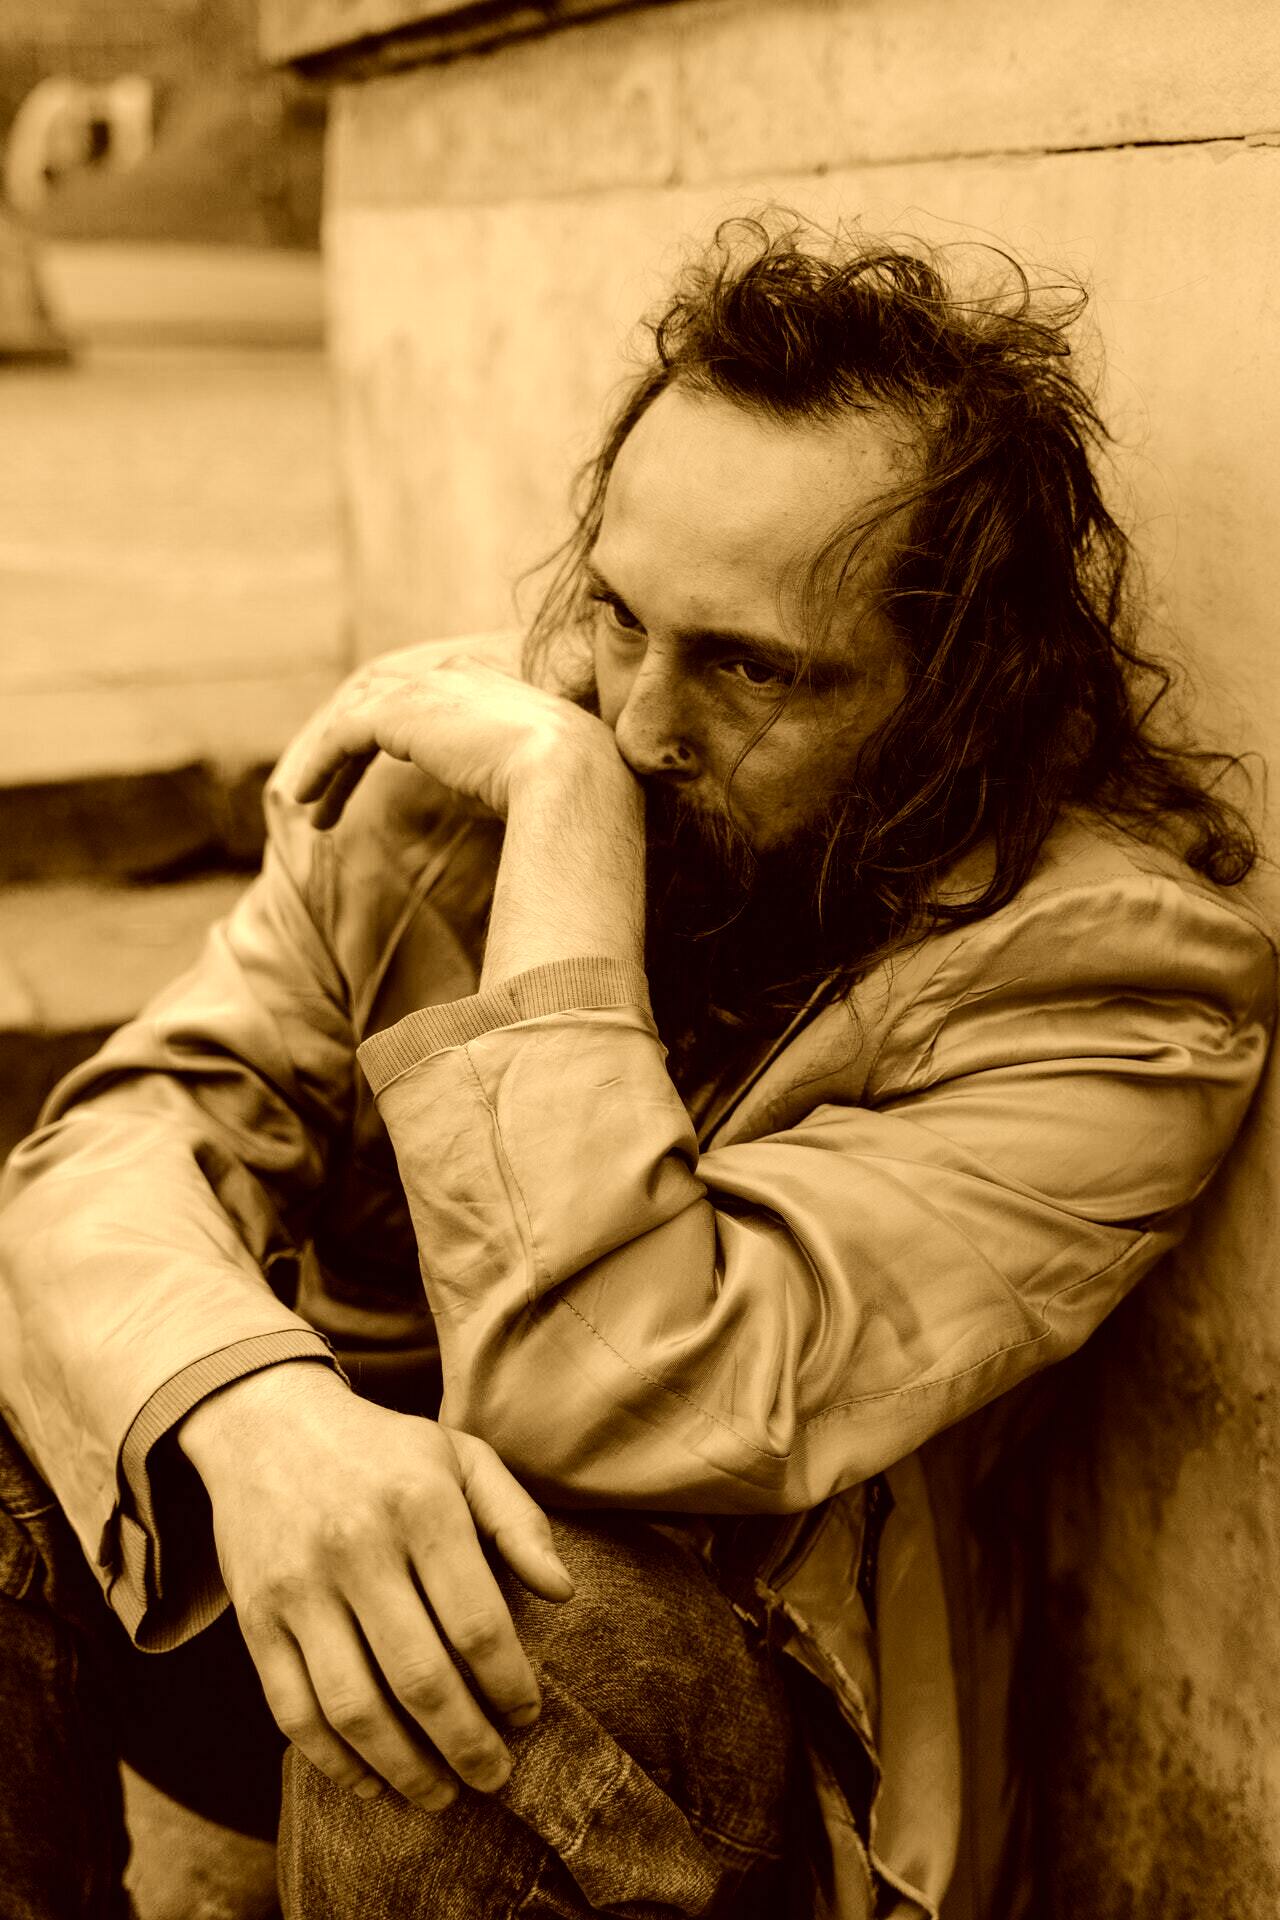 John could not find a job after getting kicked out and became homeless. | Source: Pexels